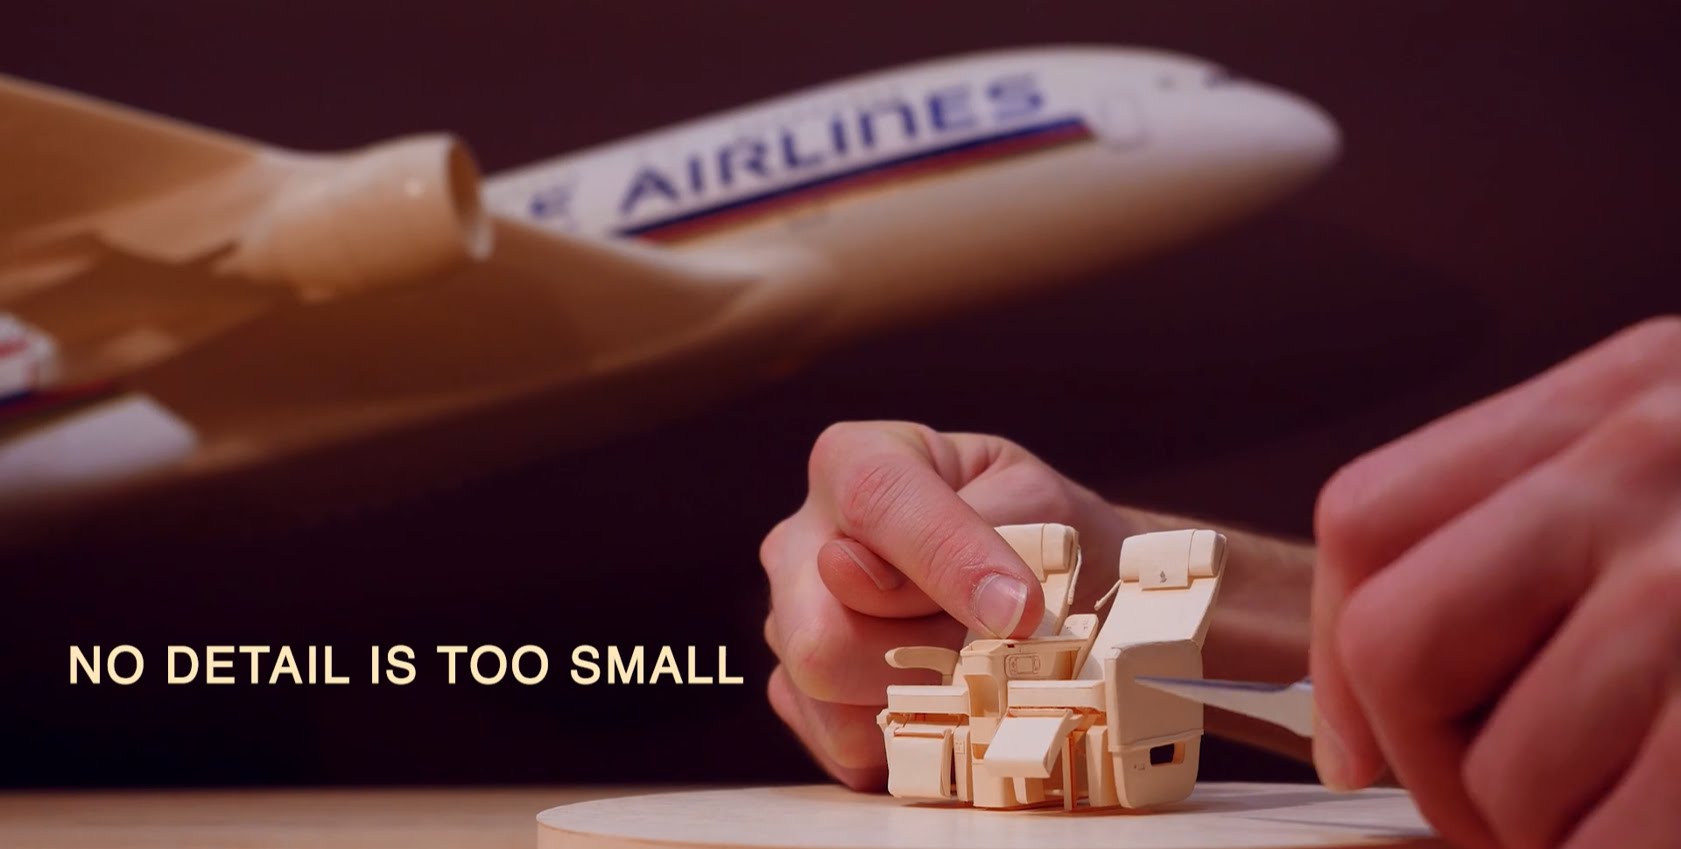 Singapore Airlines - No Detail is Too Small